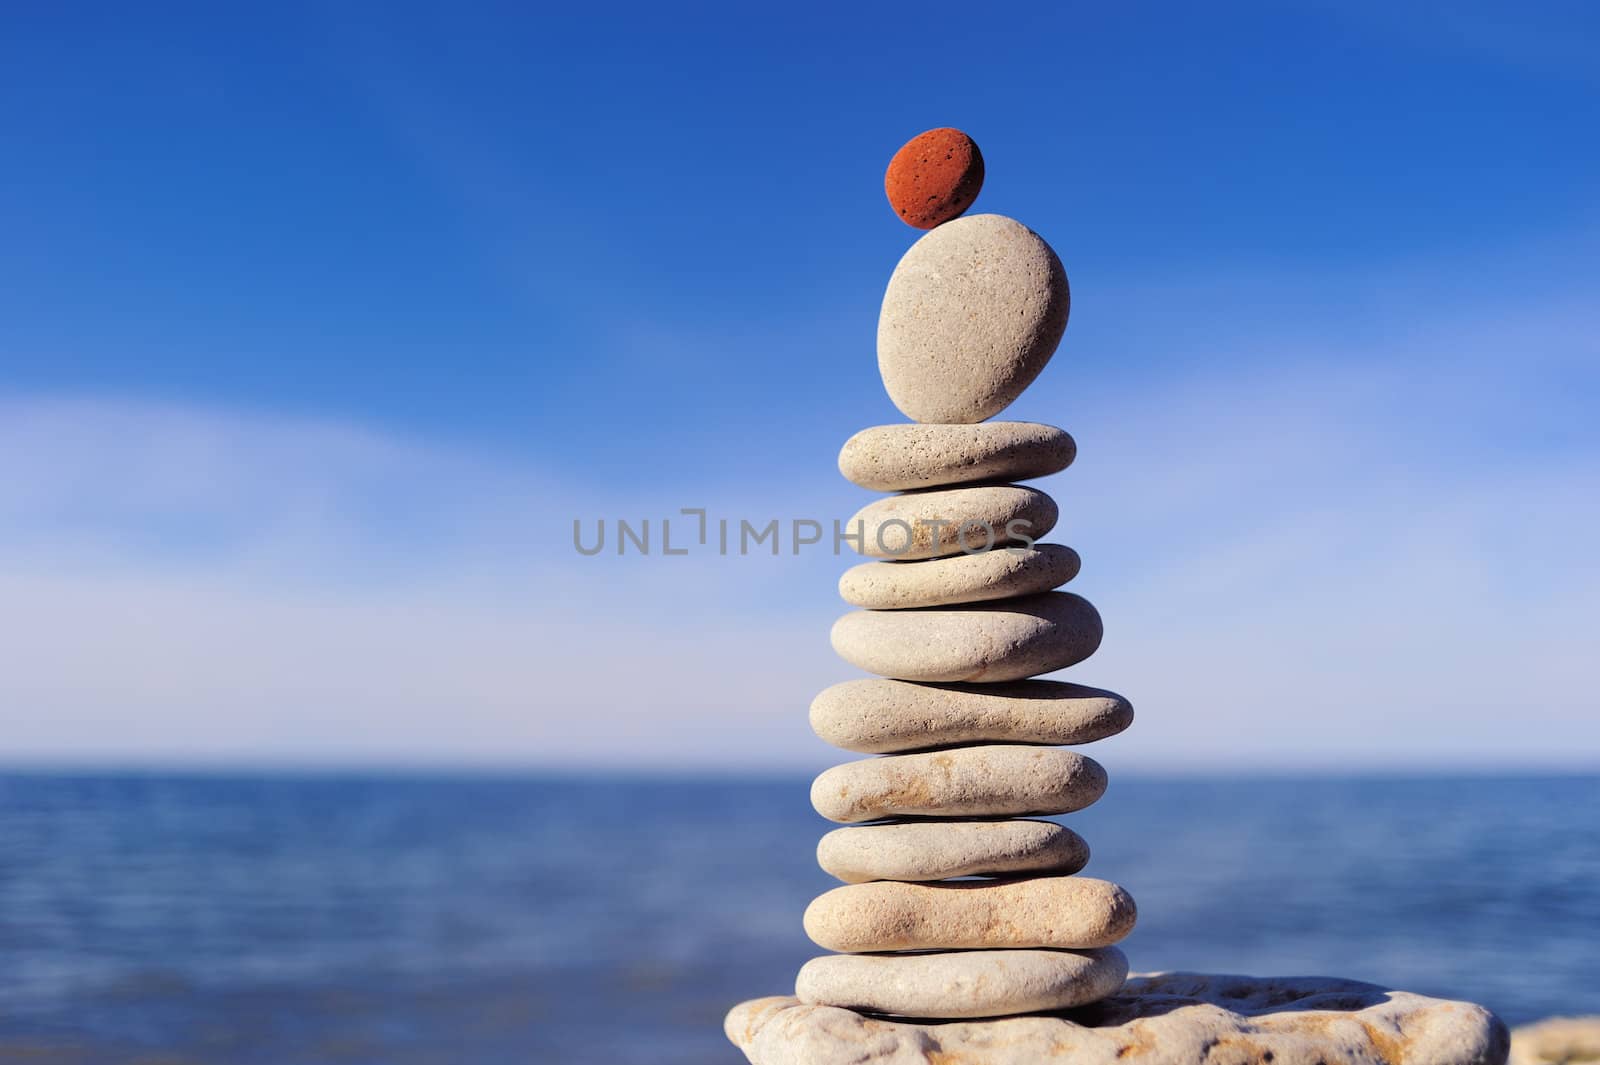 Balance of red stone on the top of stack of white pebbles